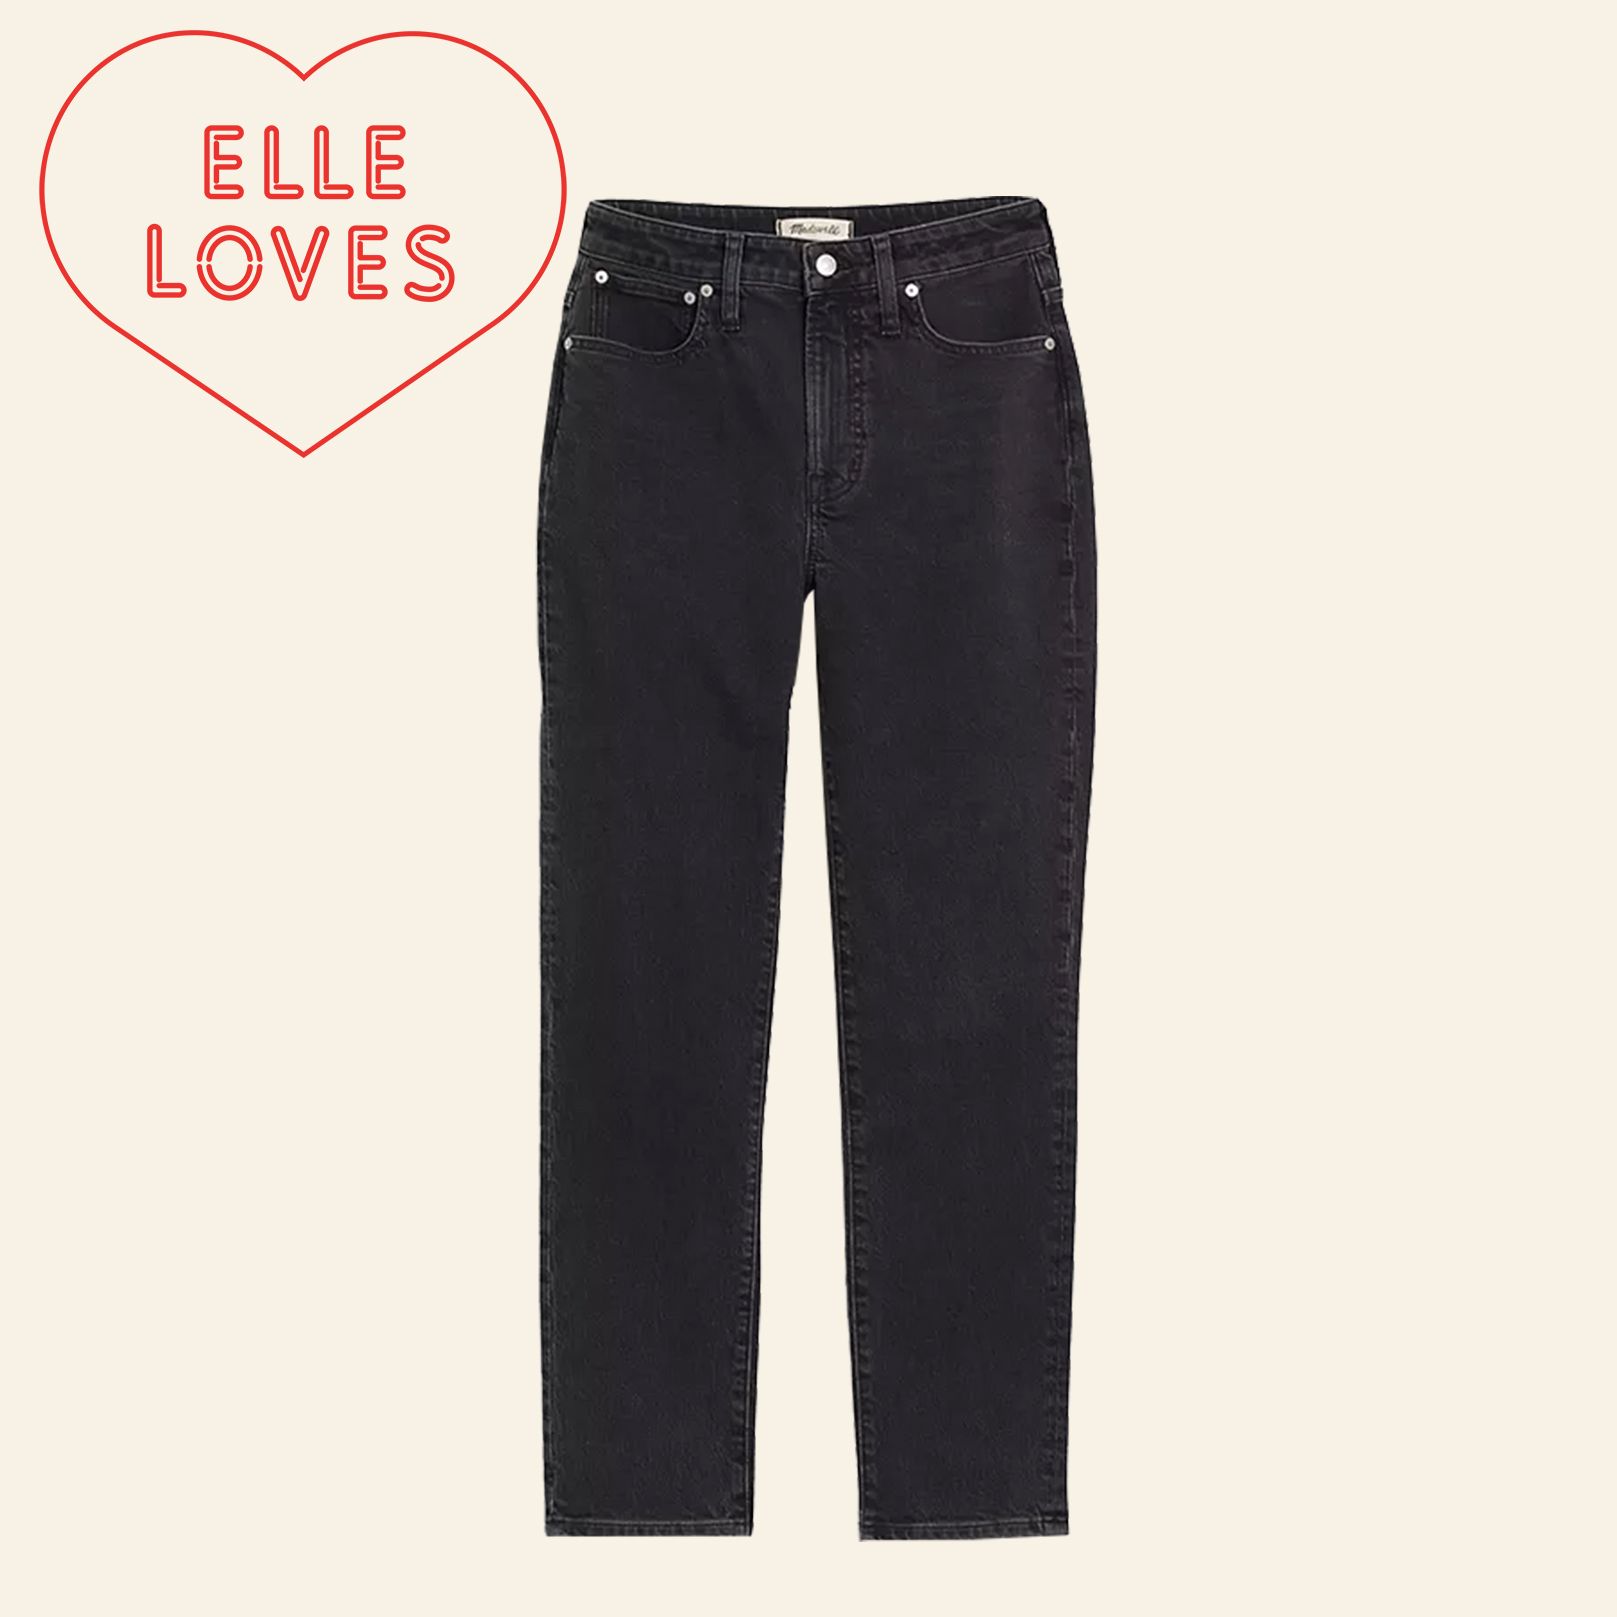 Madewell Petite Curvy Perfect Vintage Jeans Review